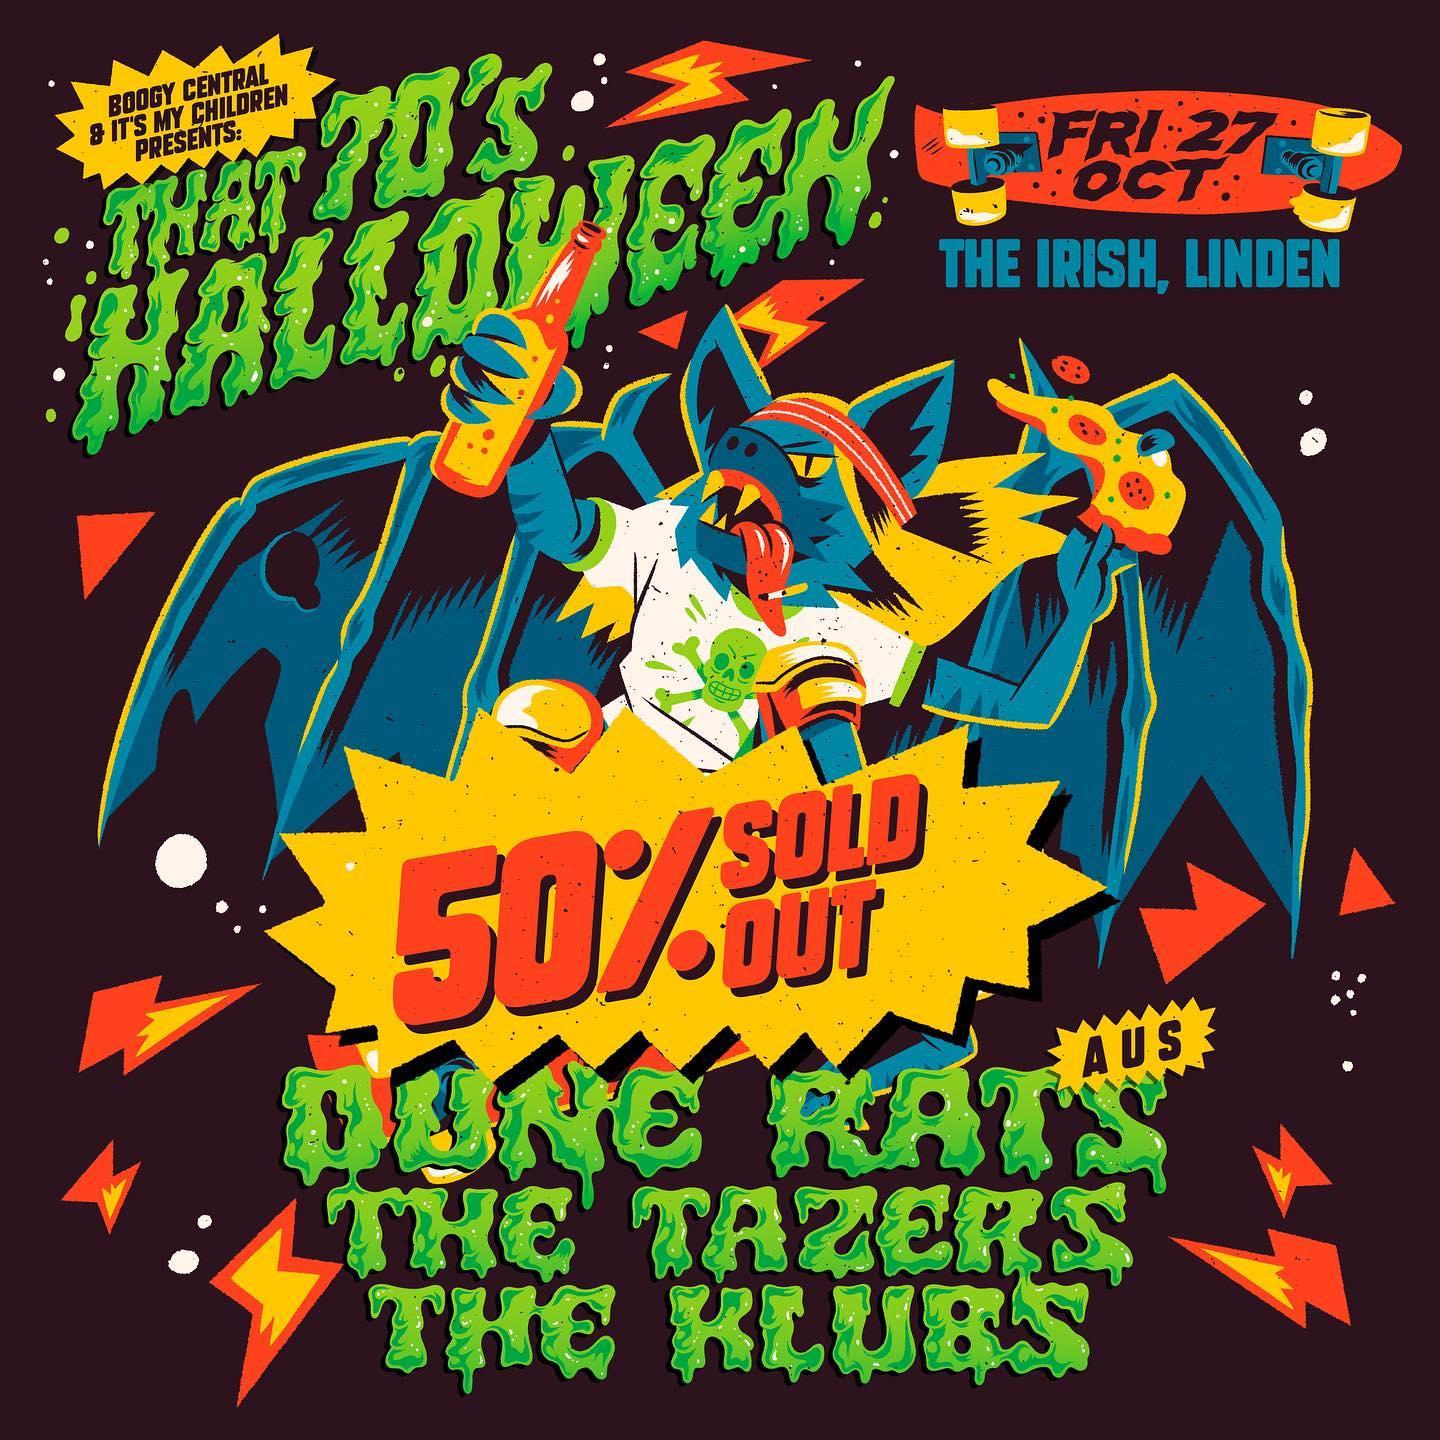 Get ready for a spooky night of fun at our massive 70's themed Halloween shindig at **The Irish, Linden** in Johannesburg! Let's get weird together with this wicked lineup:

- **Dune Rats (AUS)**
- **The Tazers**
- **The Klubs**

**Event Details:**
- **Date:** Friday, 27th October
- **Venue:** The Irish, Linden

**Ticket Prices:**
- **R200:** General (Available Online)
- **R250:** Door (If online tickets do not sell out)

Please note:
- **R.O.A.R.** (Right of Admission Reserved)
- **No Dickheads** allowed!

Get ready to dance, groove, and have a spooktacular time at this electrifying Halloween party! Don't miss out on the fun - grab your tickets online before they sell out! 🎃👻🕺 #HalloweenParty #70sTheme #LiveMusic #DuneRats #TheTazers #TheKlubs